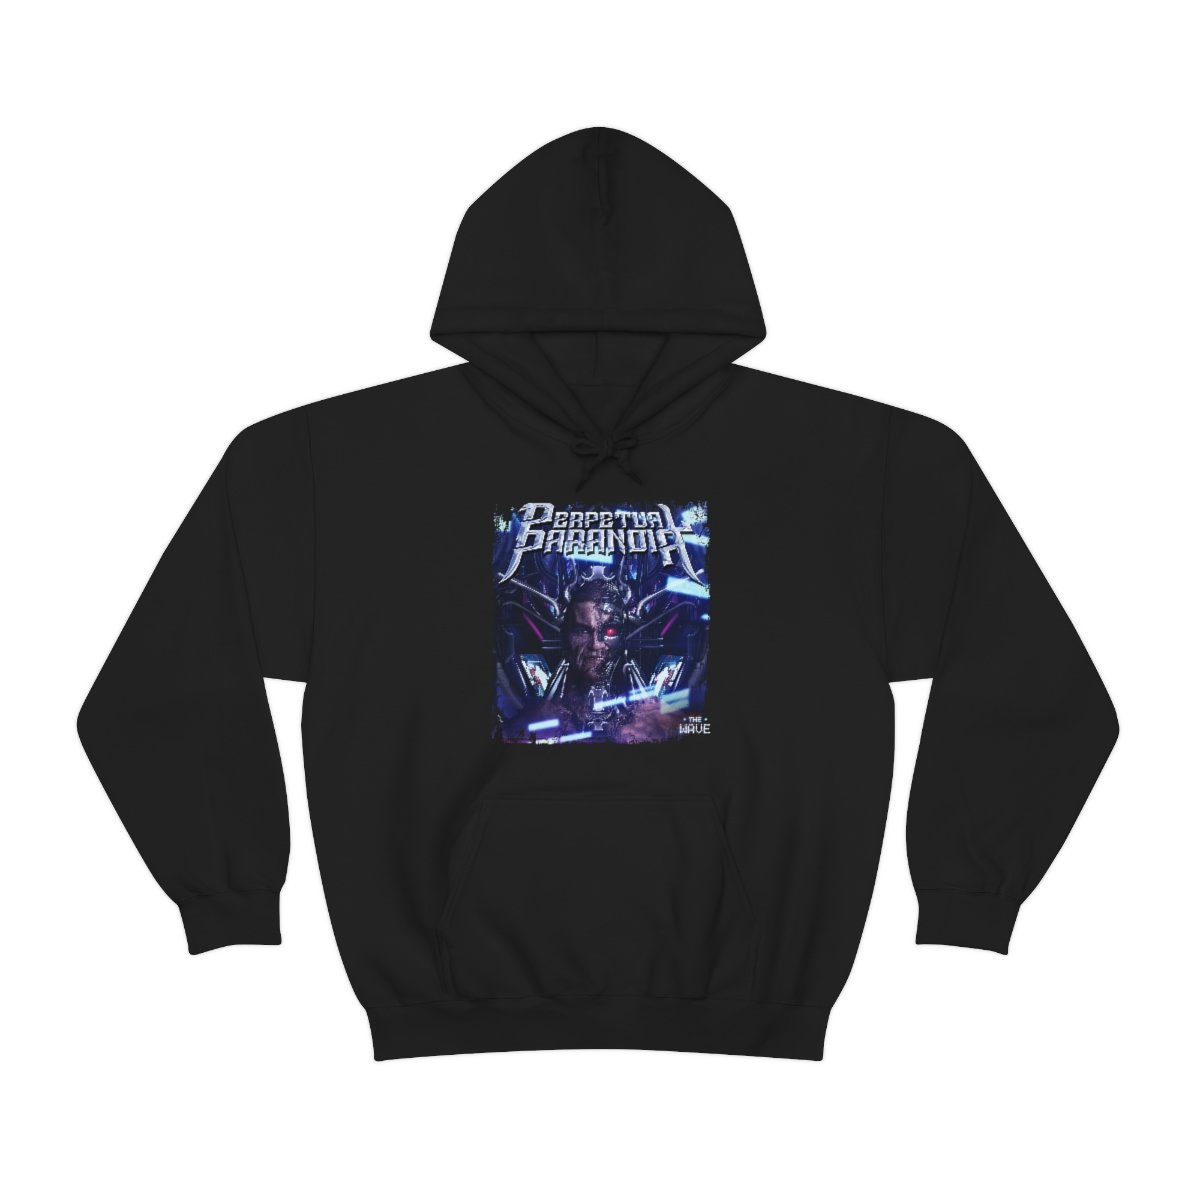 Perpetual Paranoia – The Wave Pullover Hooded Sweatshirt